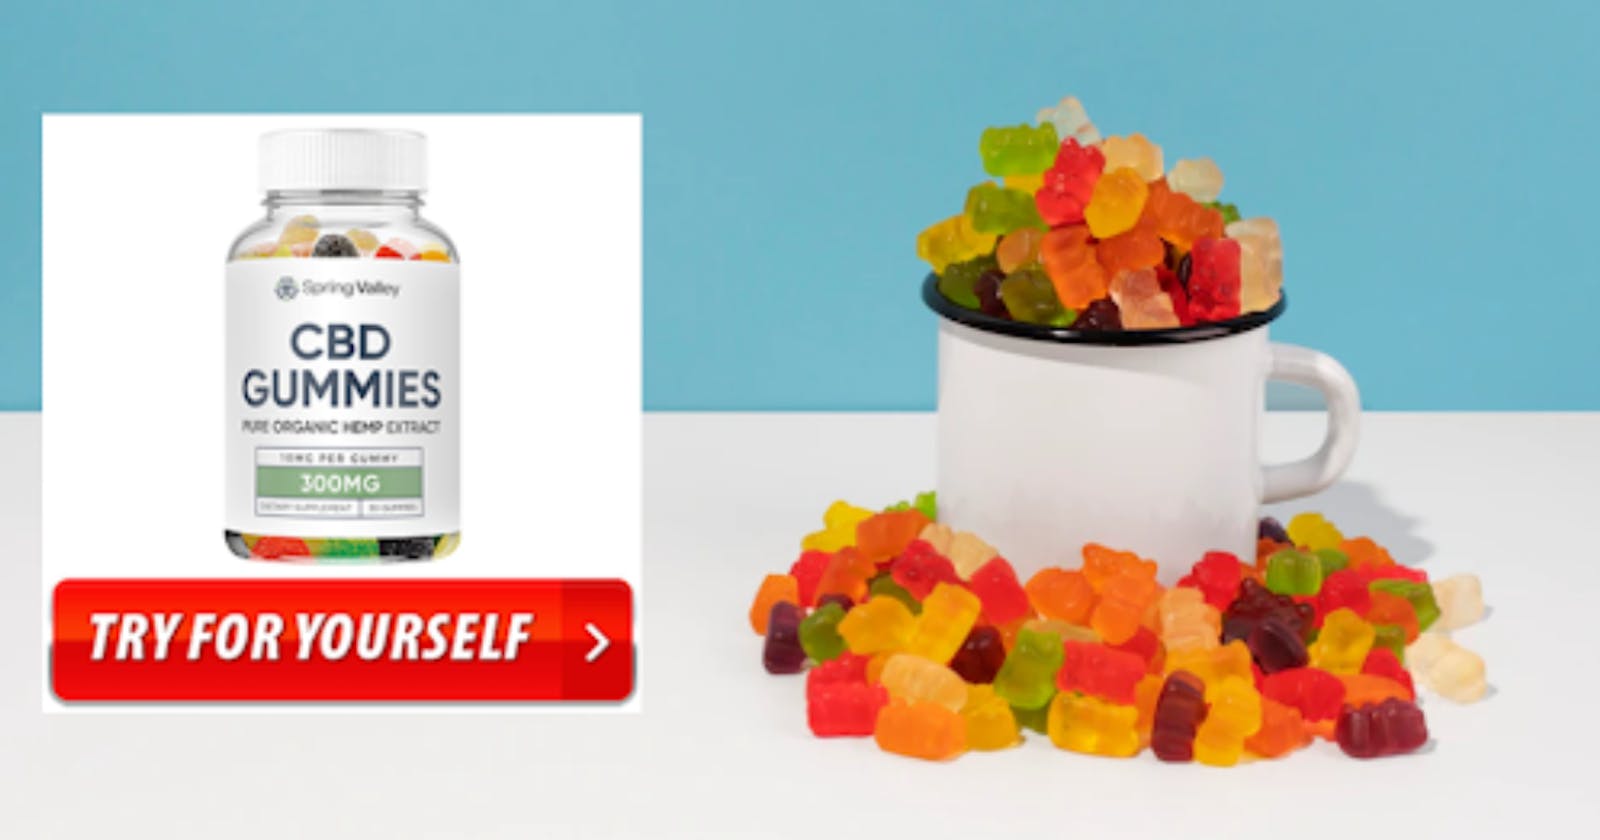 Spring Valley CBD Gummies Reviews, Official Shark Tank Scam or Real?